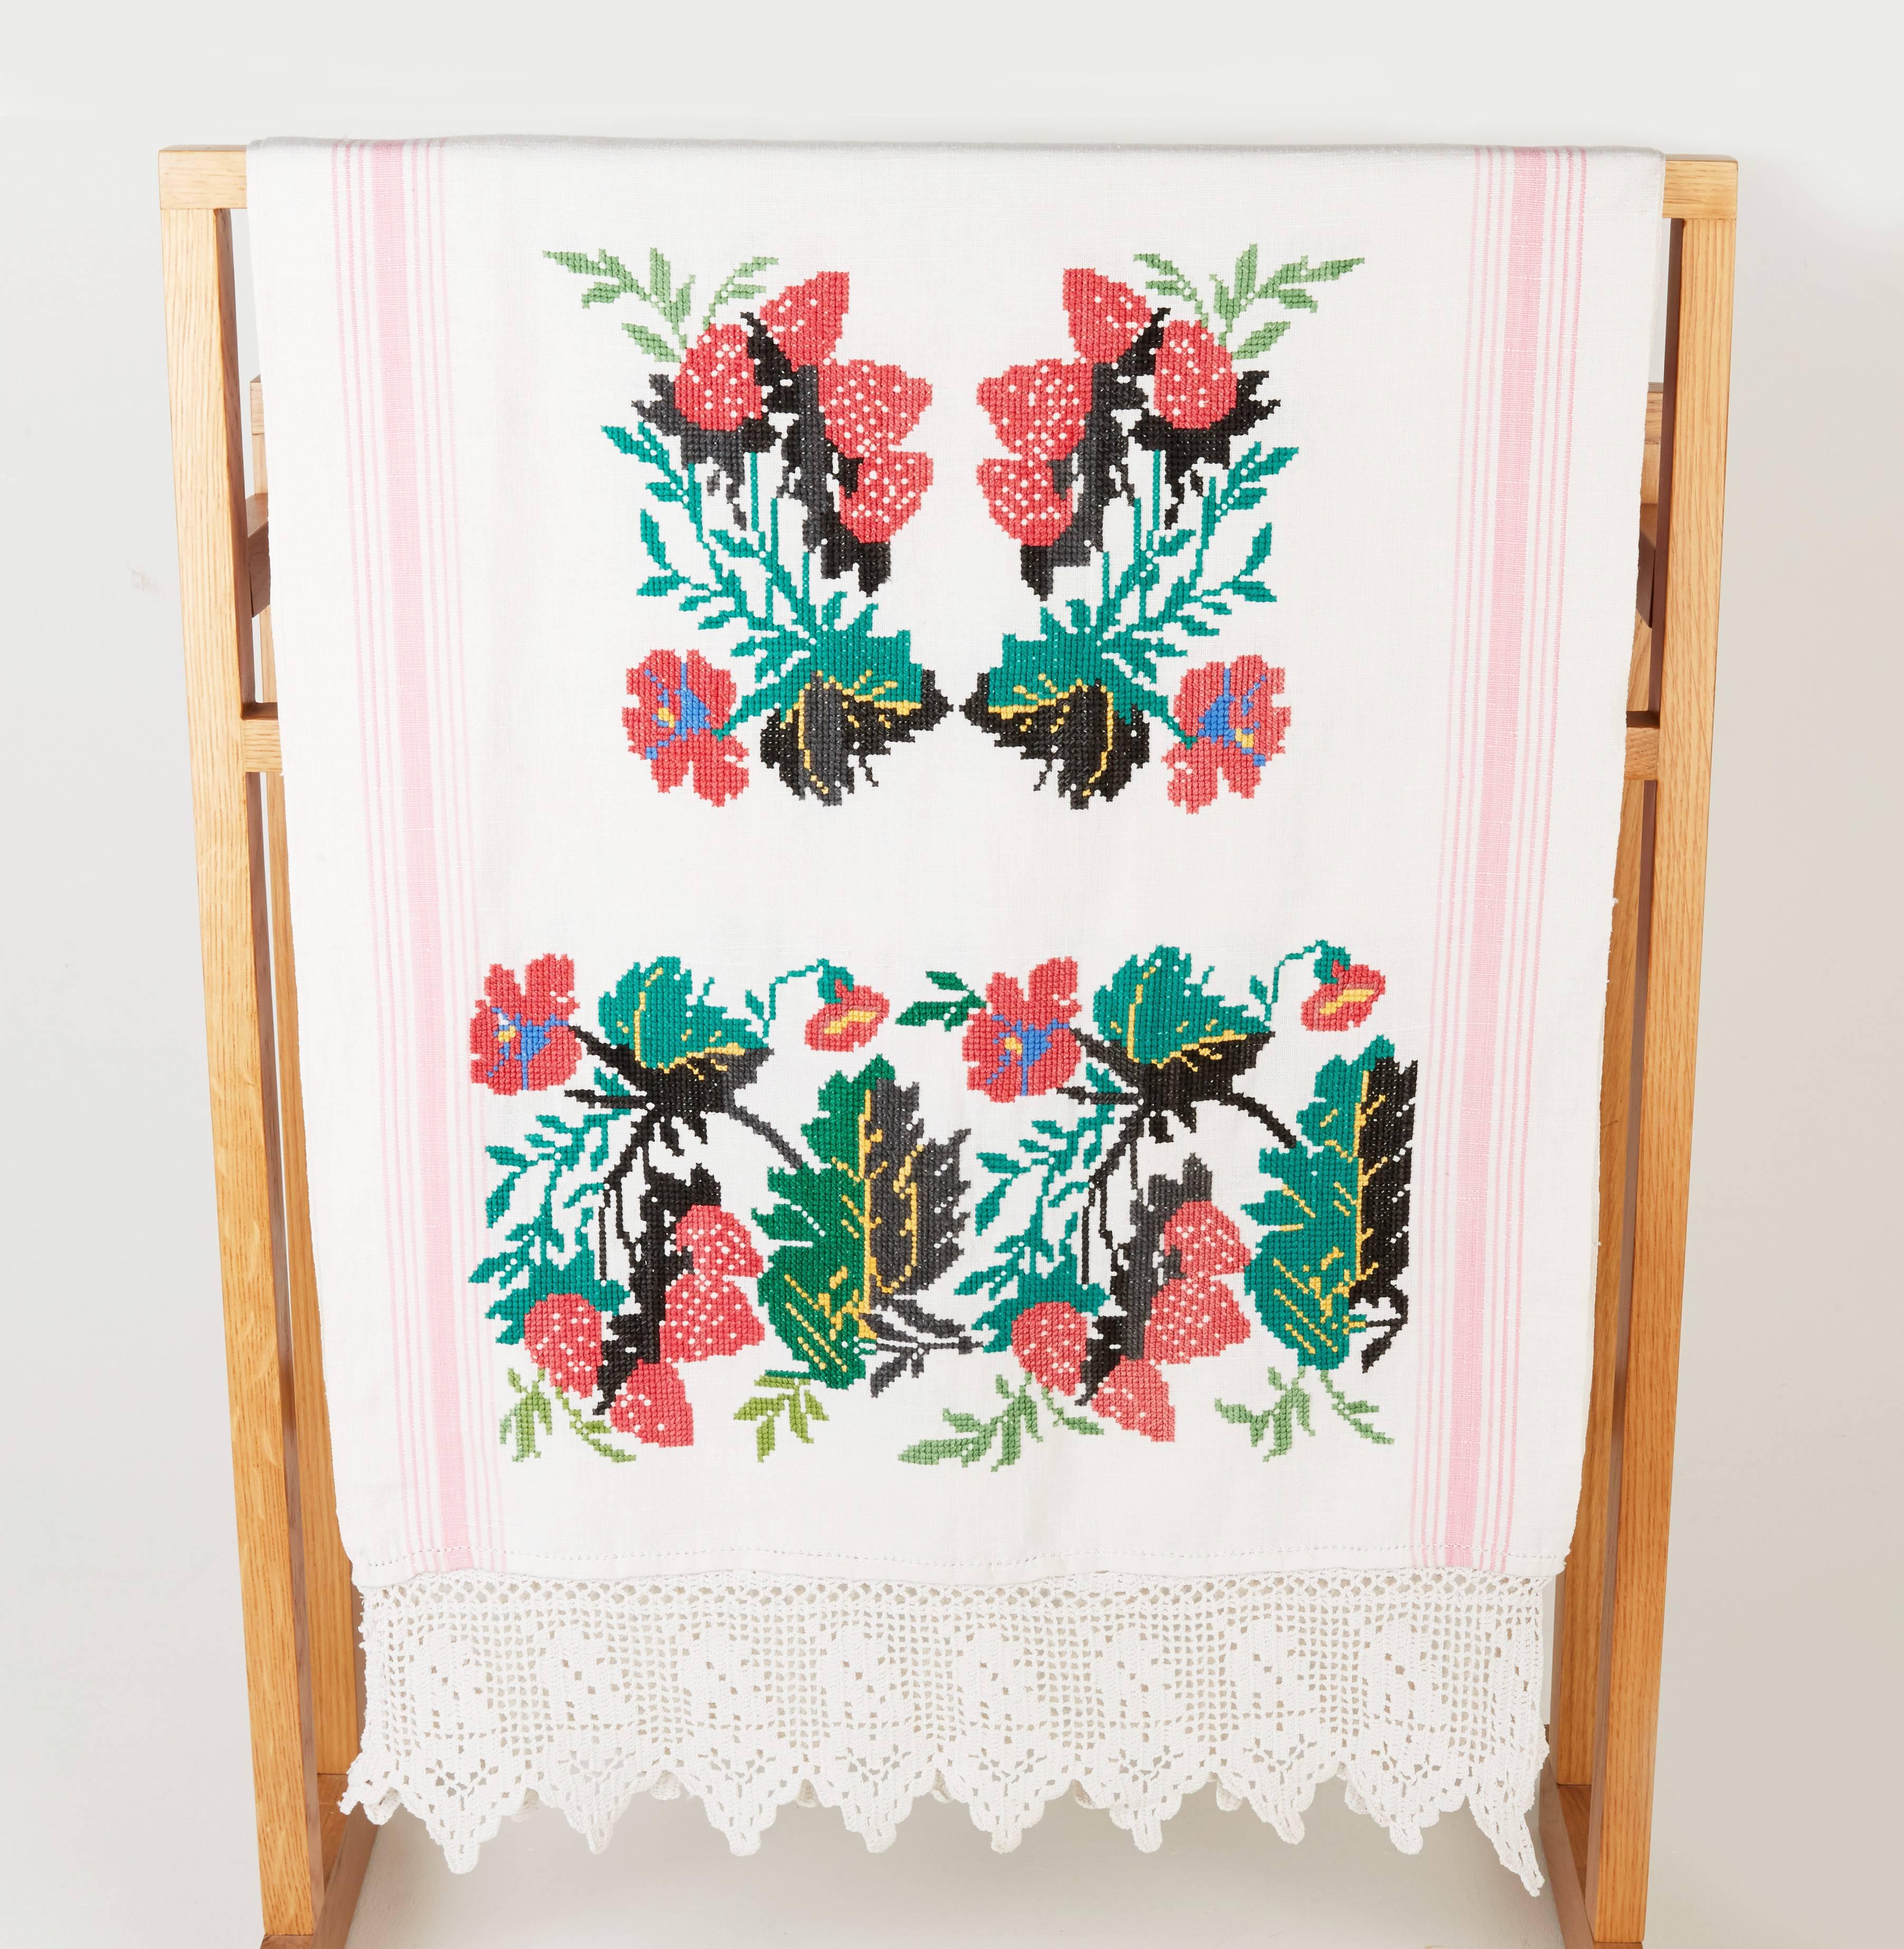 Vintage Ukrainian embroidered Rushnyk. The Rushnyk is an embroidered cloth used both for decorative and ceremonial purposes. The ritual cloth in Ukraine is meant to accompany a person throughout their life, and played a prominent role in all stages